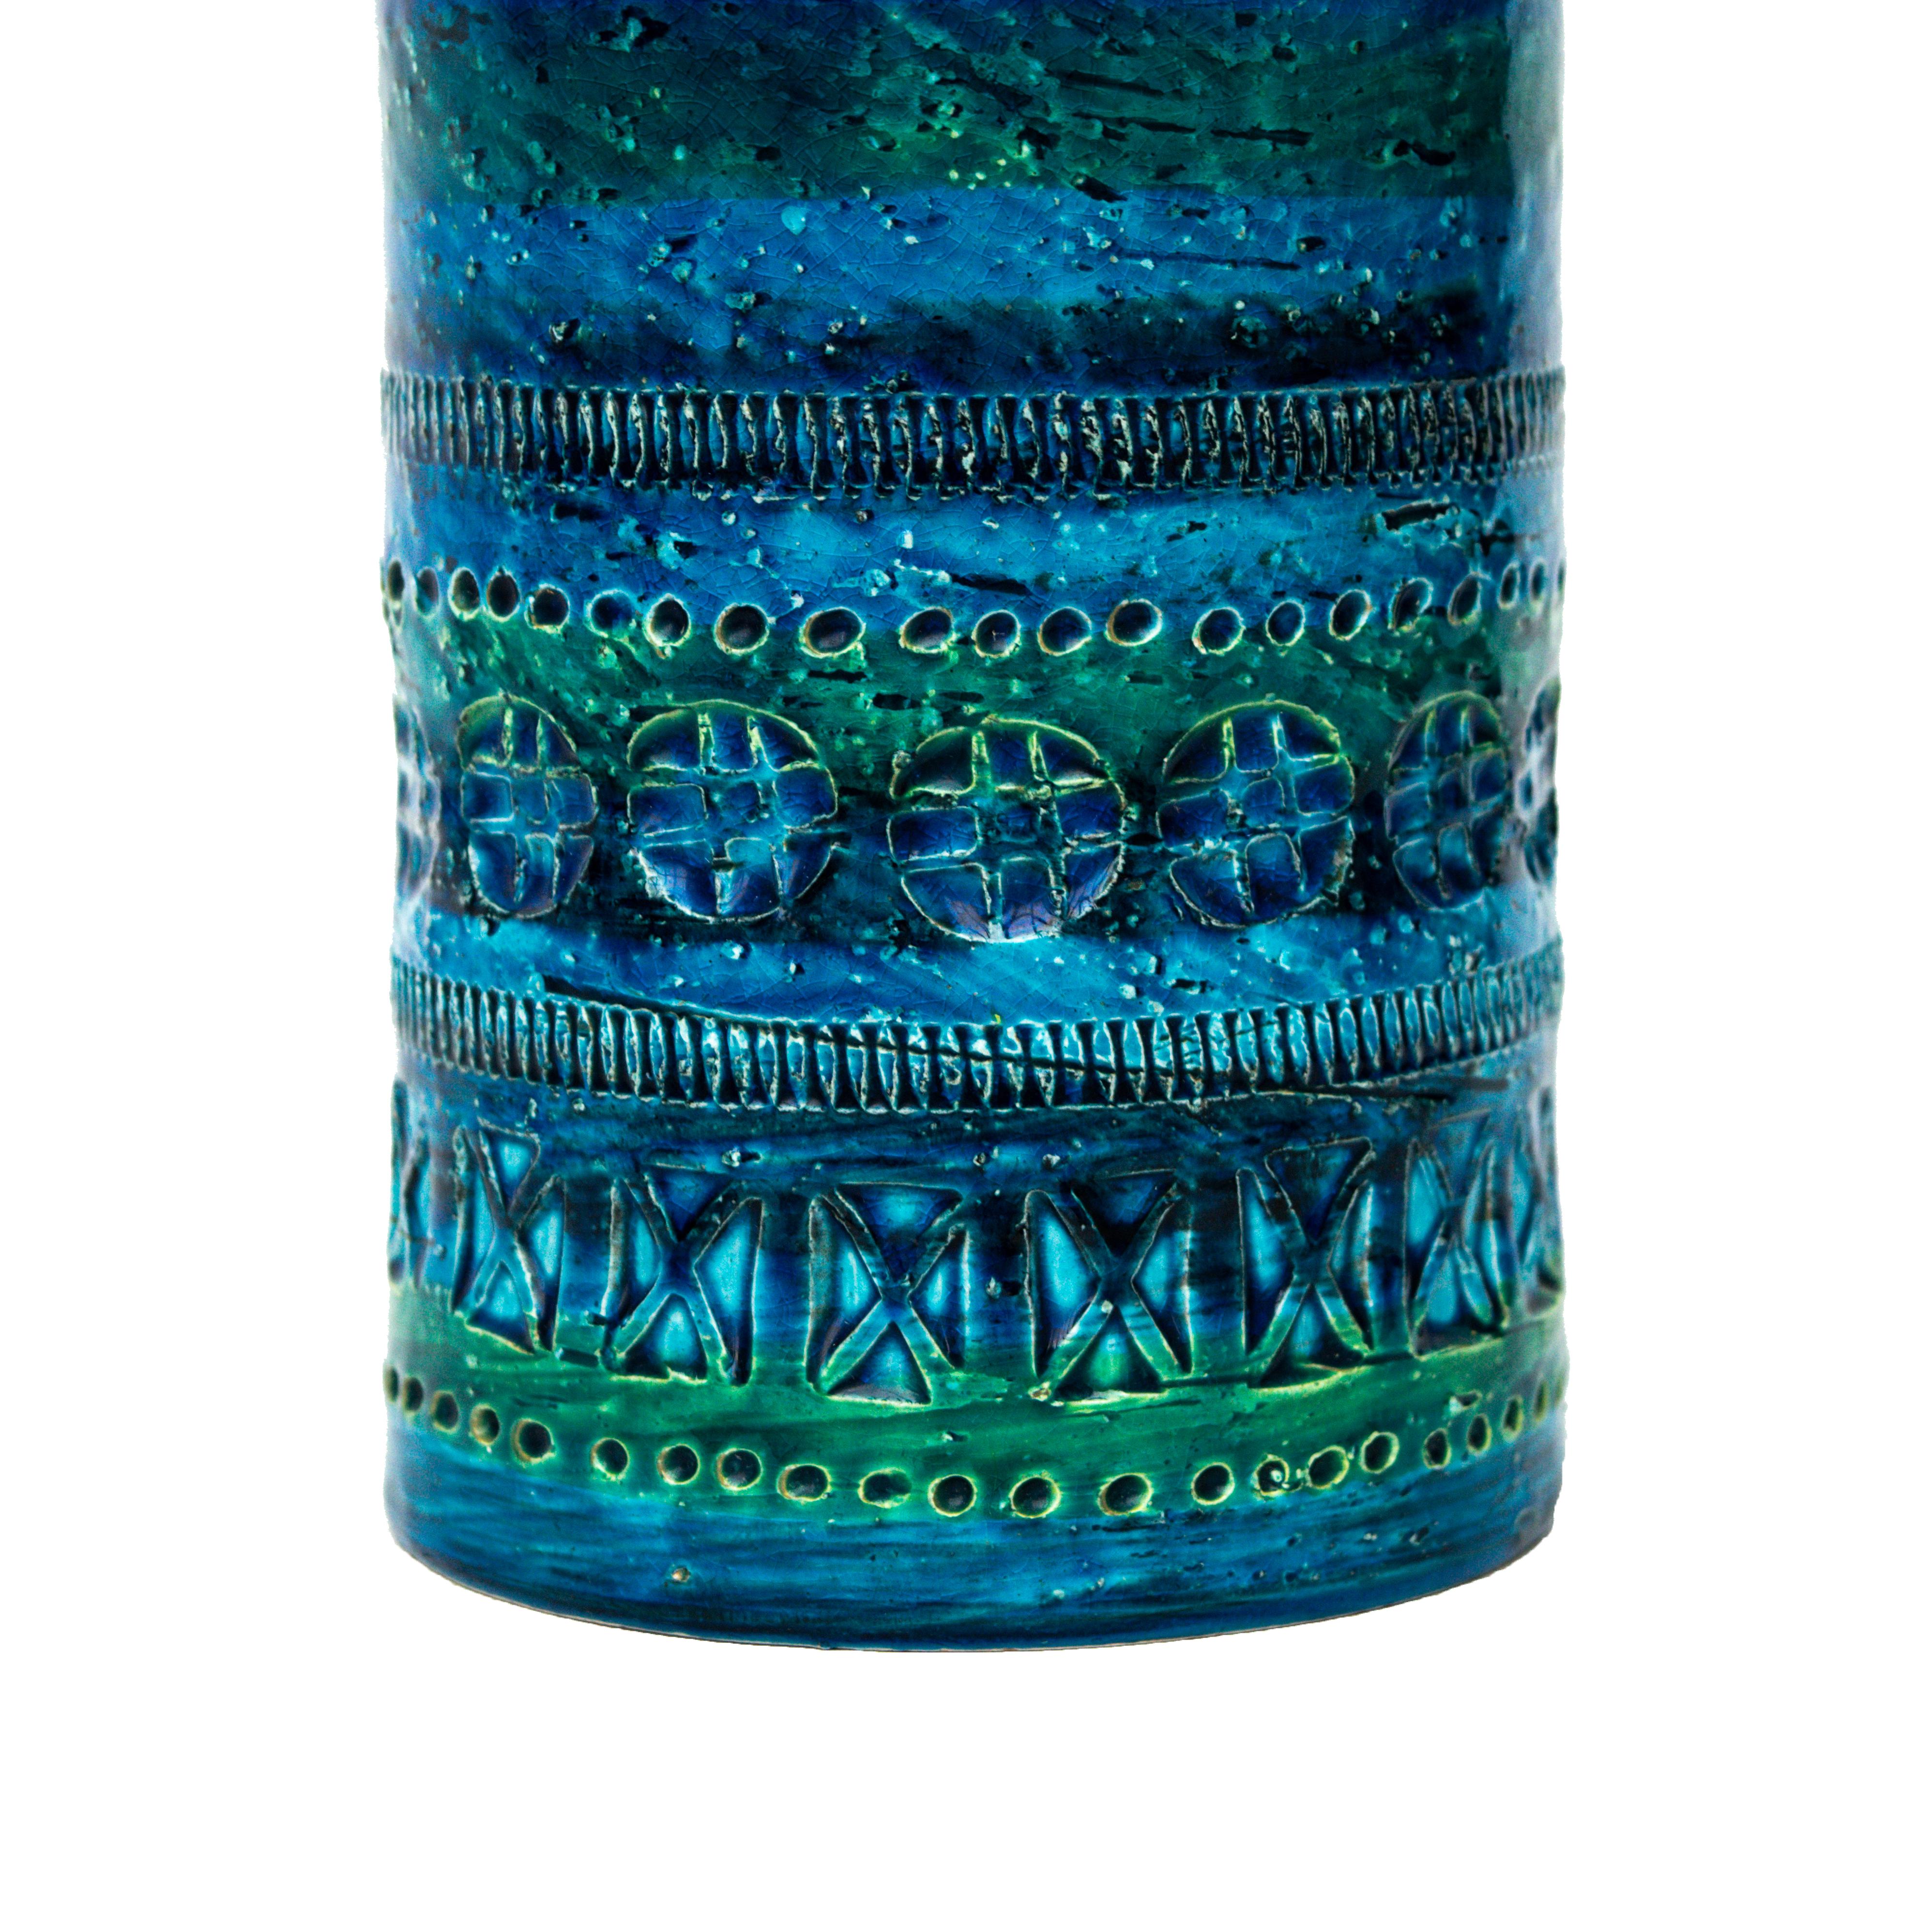 This vase was thrown and embossed by hand. The piece has been painted by hand with the classical Rimini blue shiny transparent glaze.